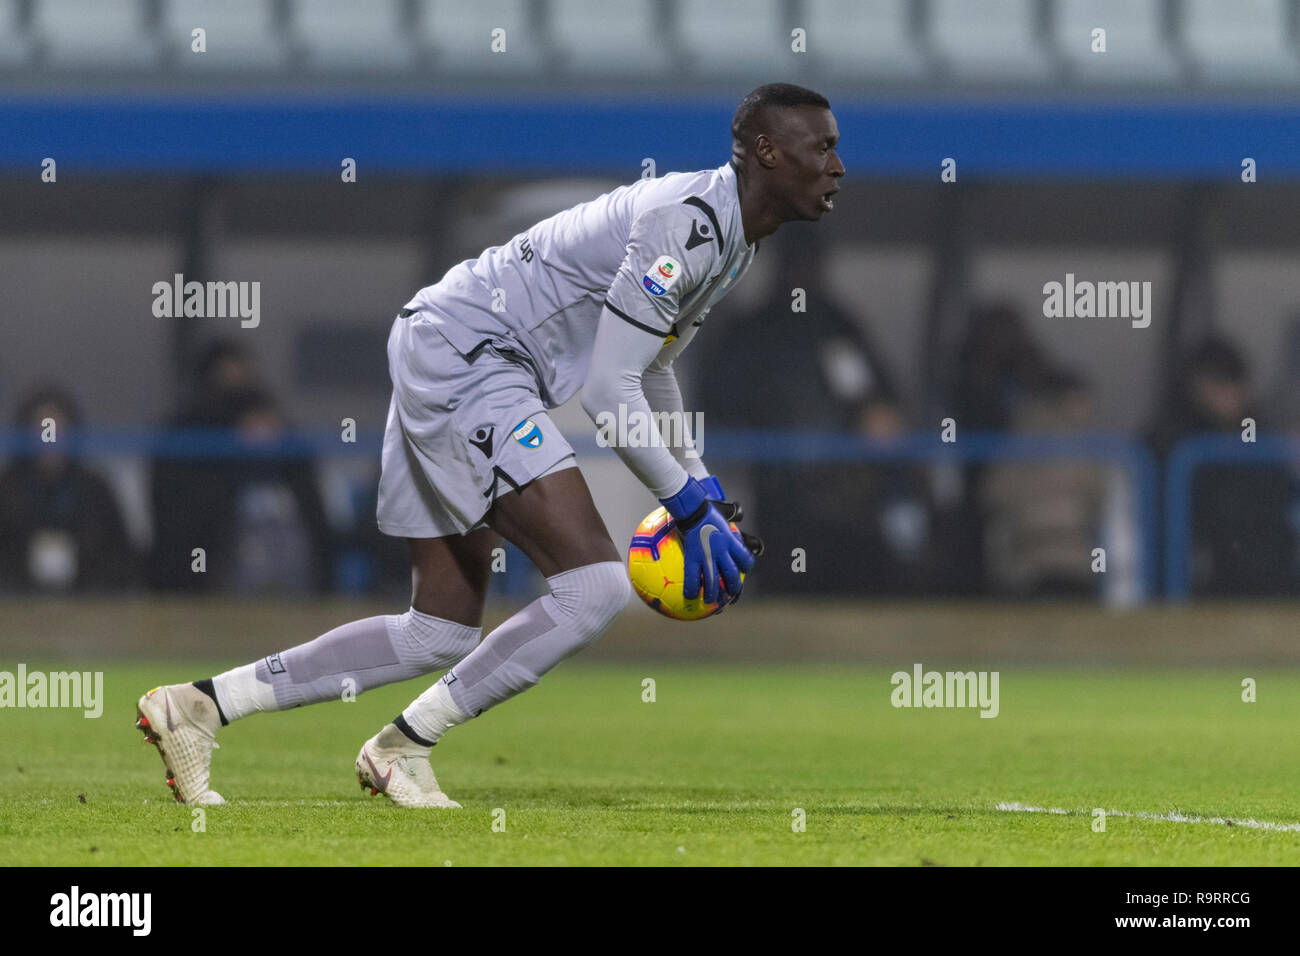 Alfred Gomis (Spal) during the Italian 'Serie A' match between Spal 0-0 Udinese at Paolo Mazza Stadium on December 26, 2018 in Ferrara, Italy. Credit: Maurizio Borsari/AFLO/Alamy Live News Stock Photo